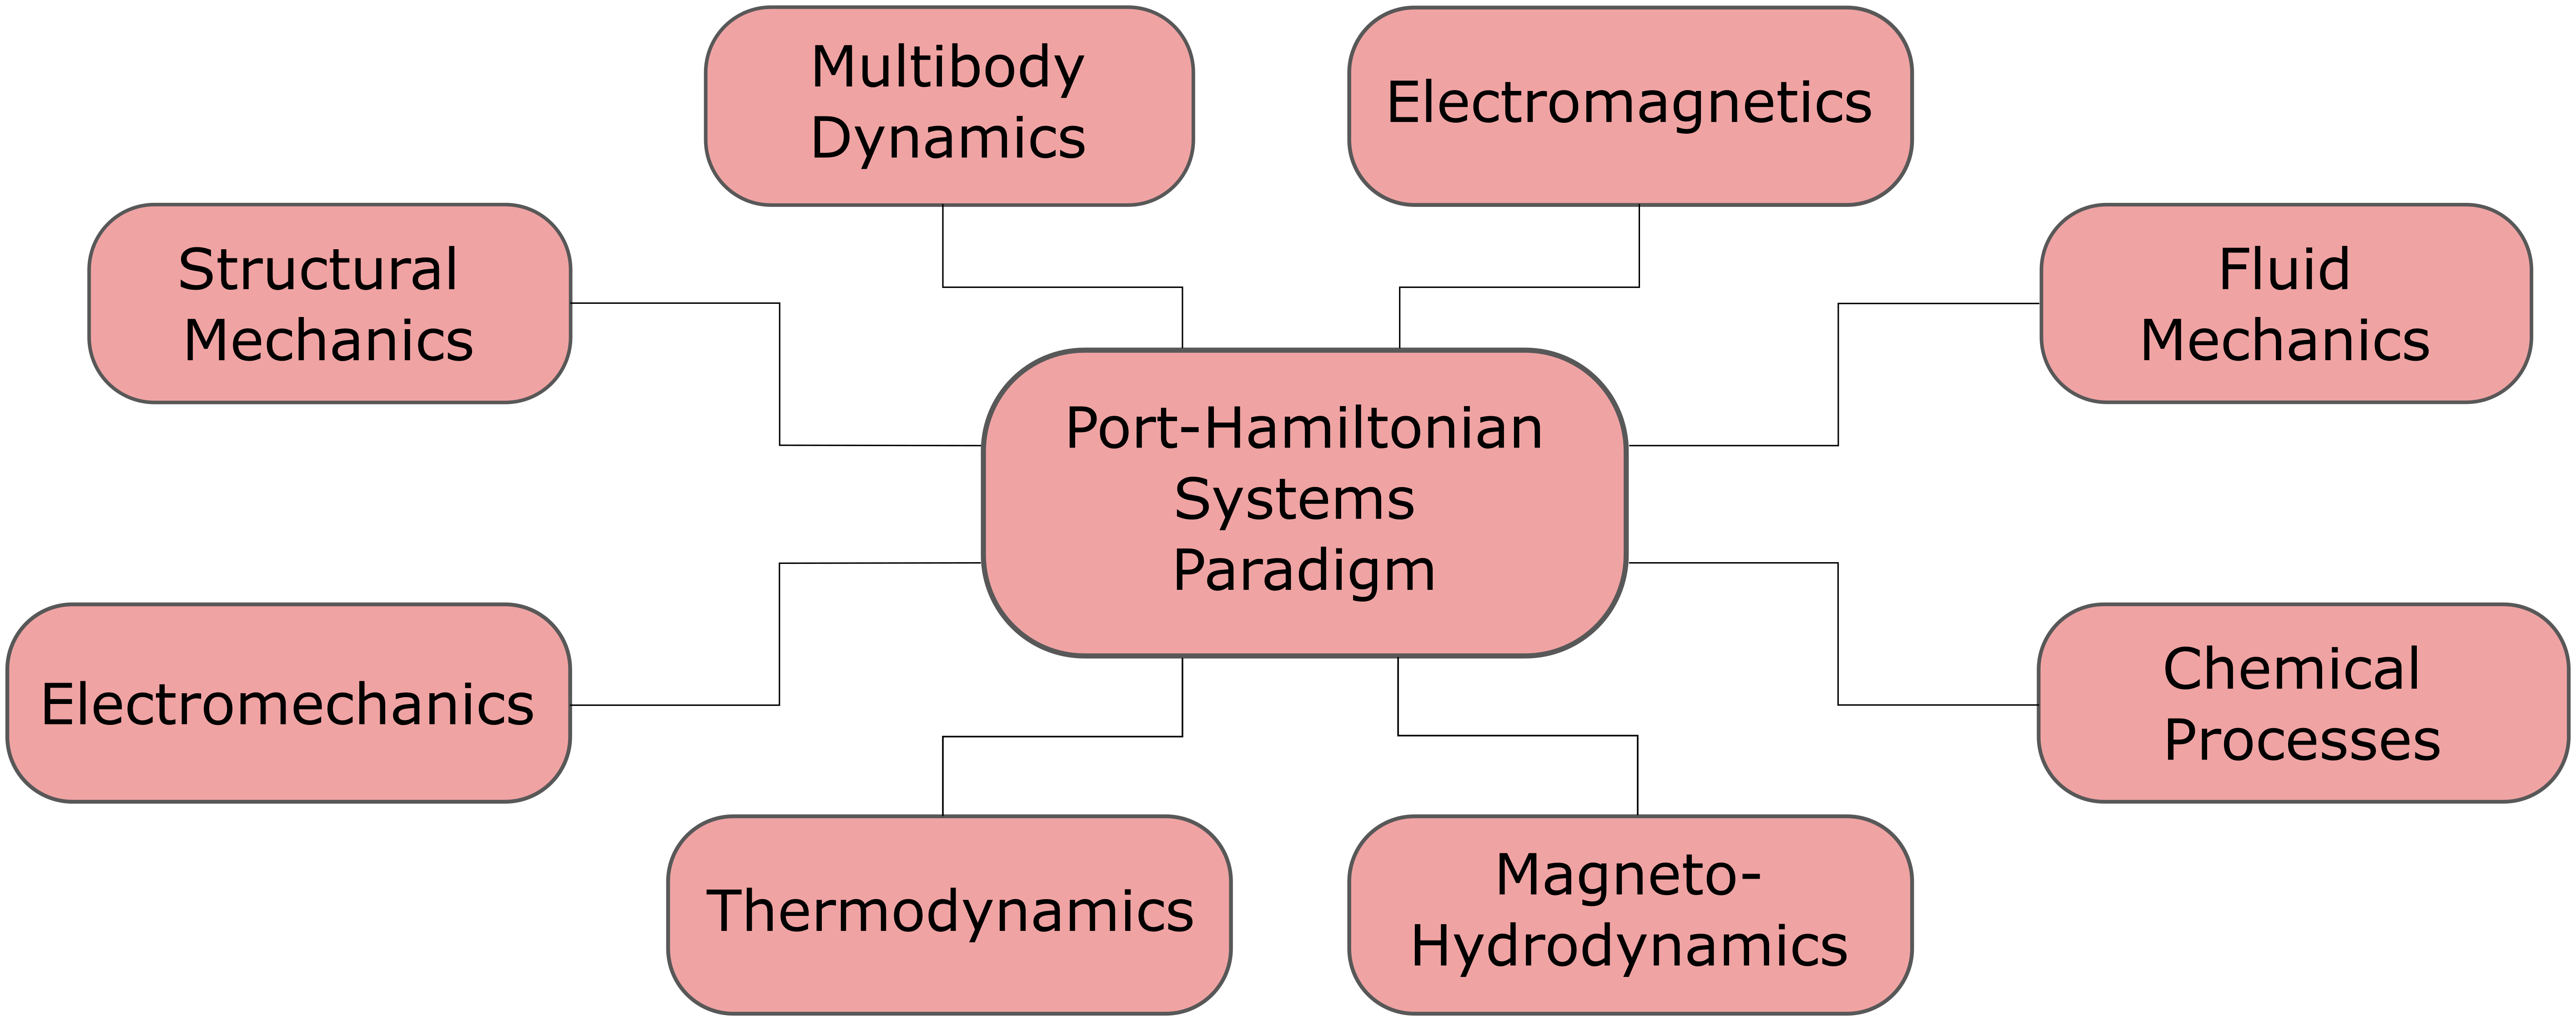 Twenty years of distributed port-Hamiltonian systems